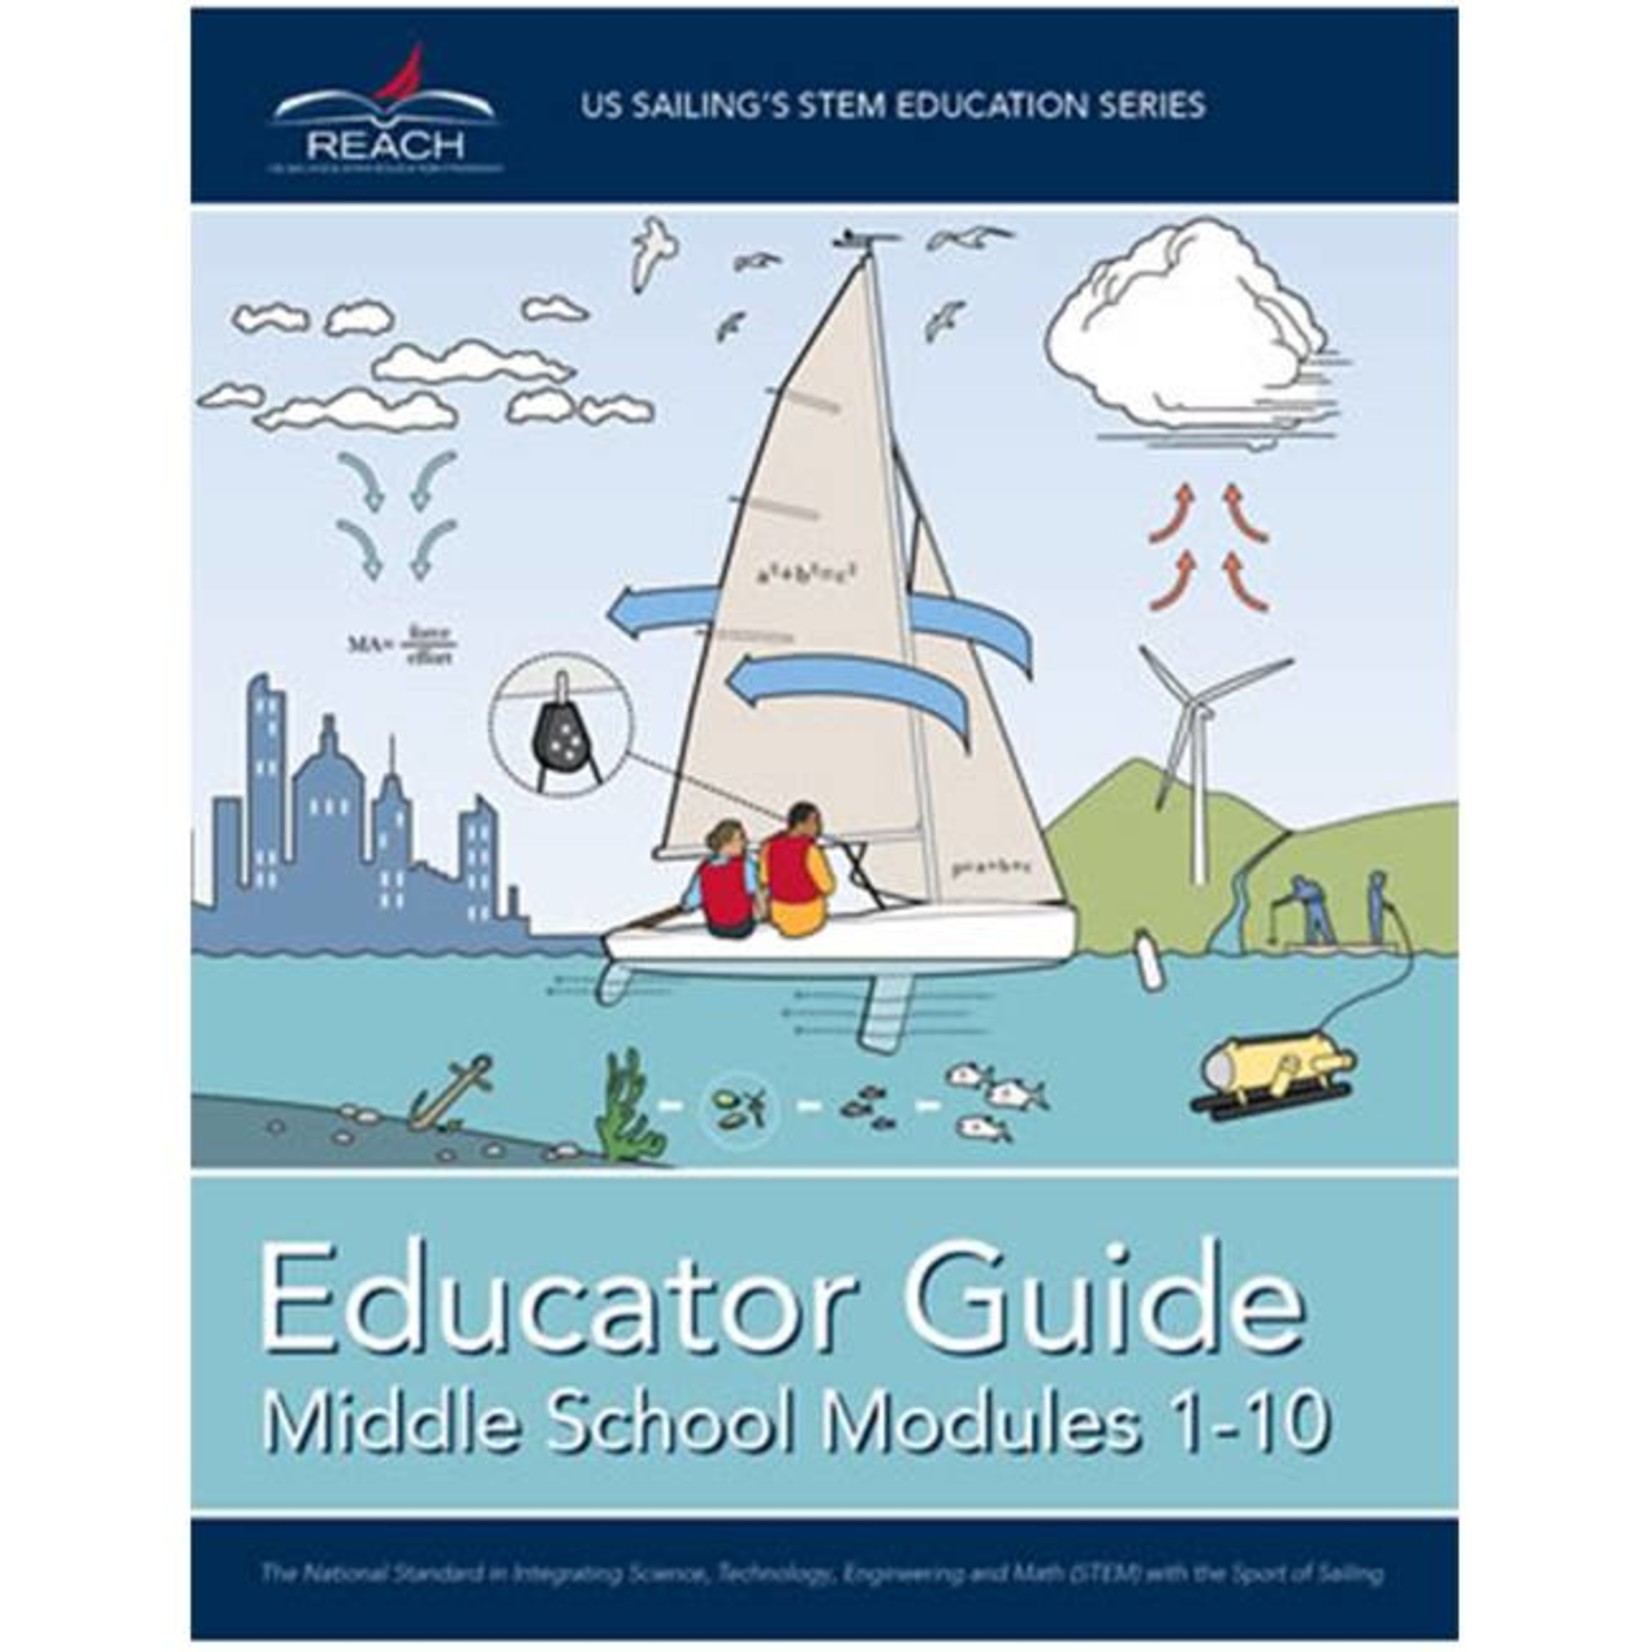 TEXT Reach Educator Guide including Middle School Modules 1-10